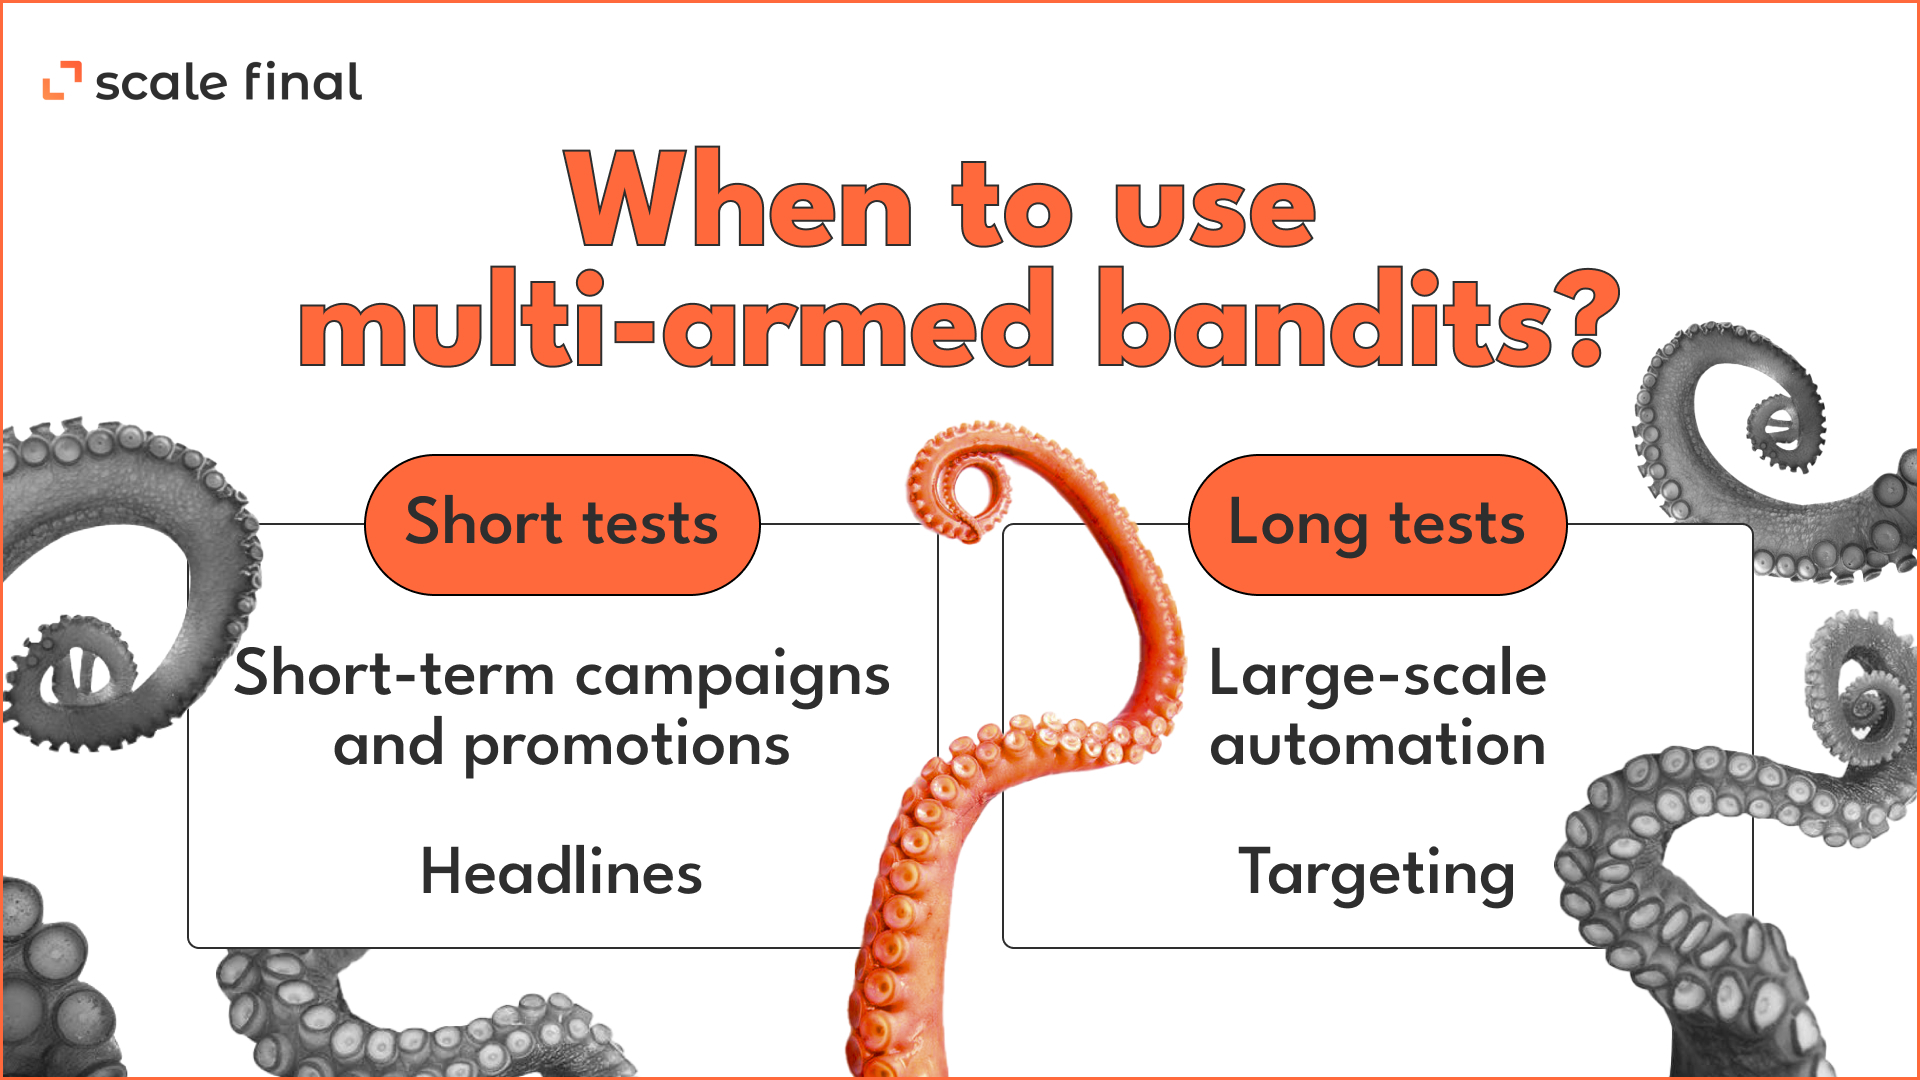 When to use multi-armed bandits?Short testsHeadlinesShort-term campaigns and promotionsLong tests Large-scale automation Targeting 